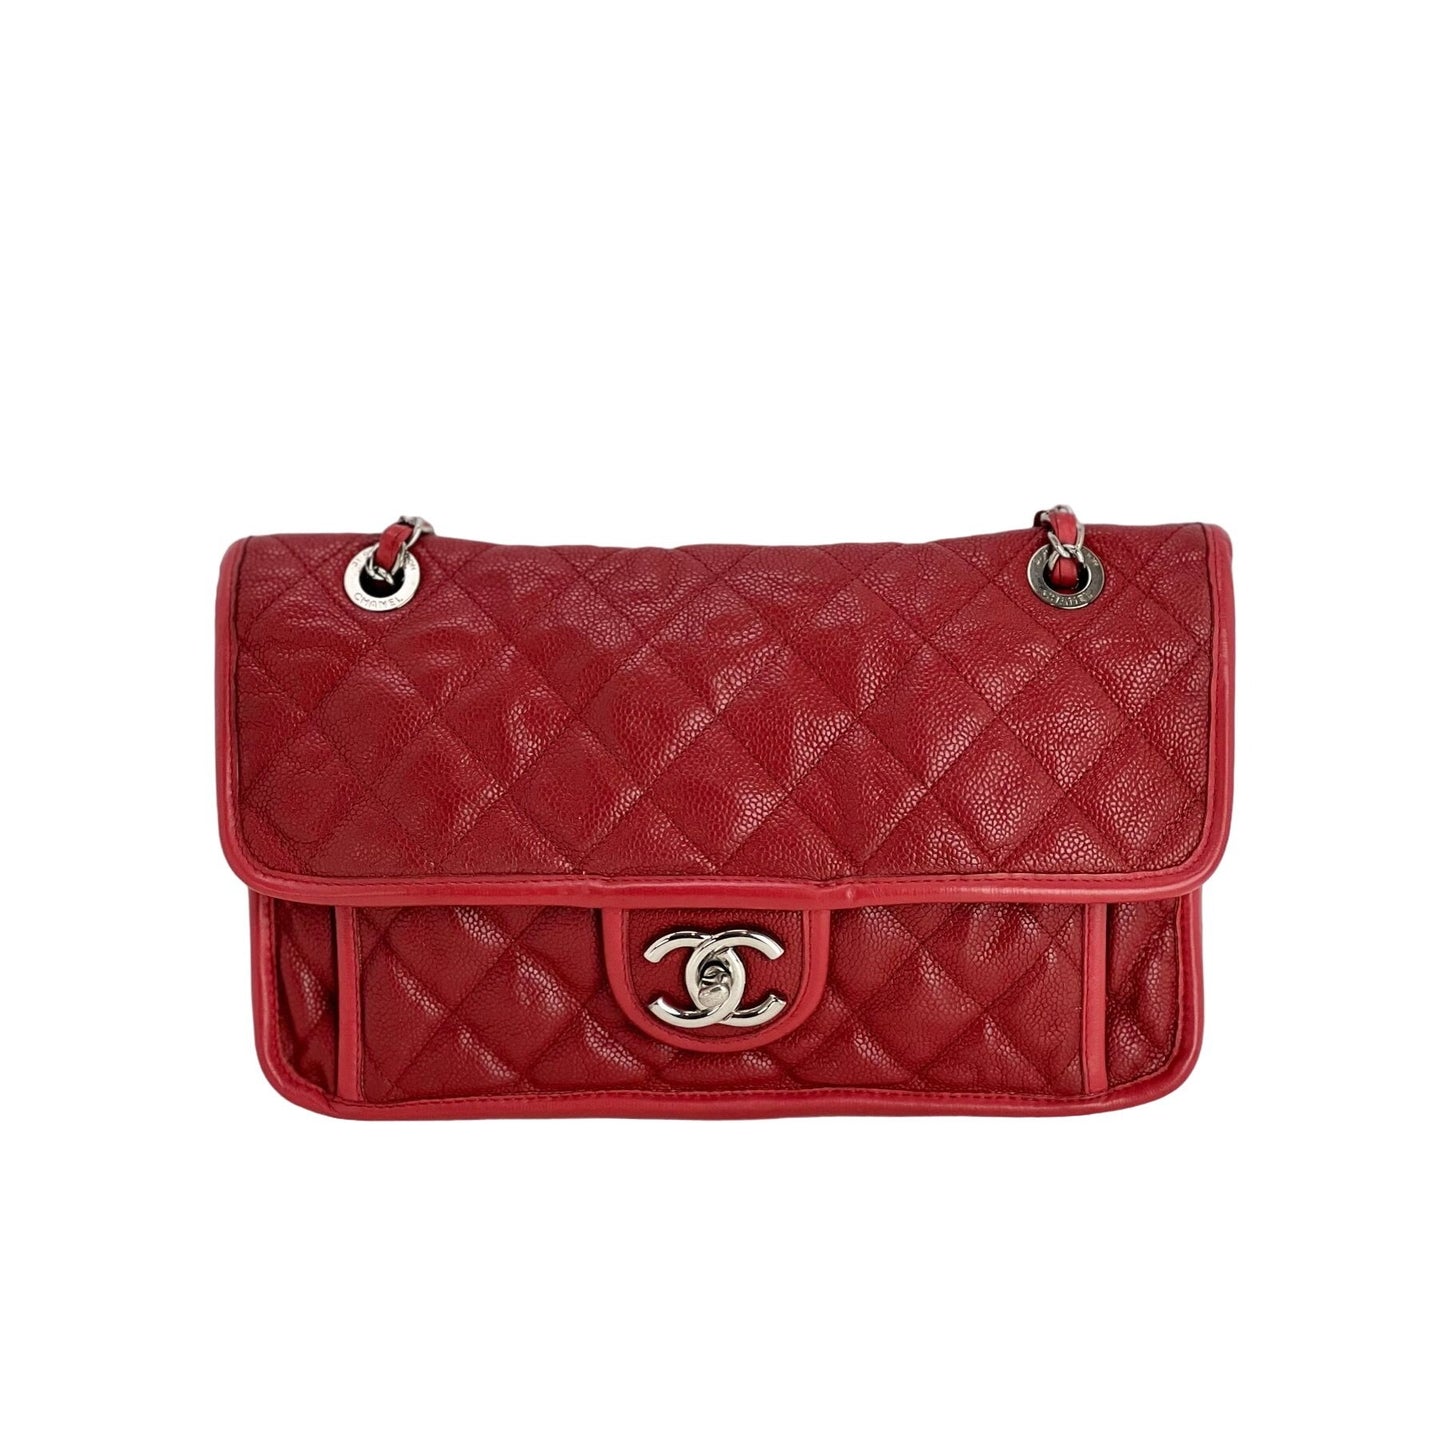 Chanel Red Perforated Leather French Riviera Shoulder Bag Chanel